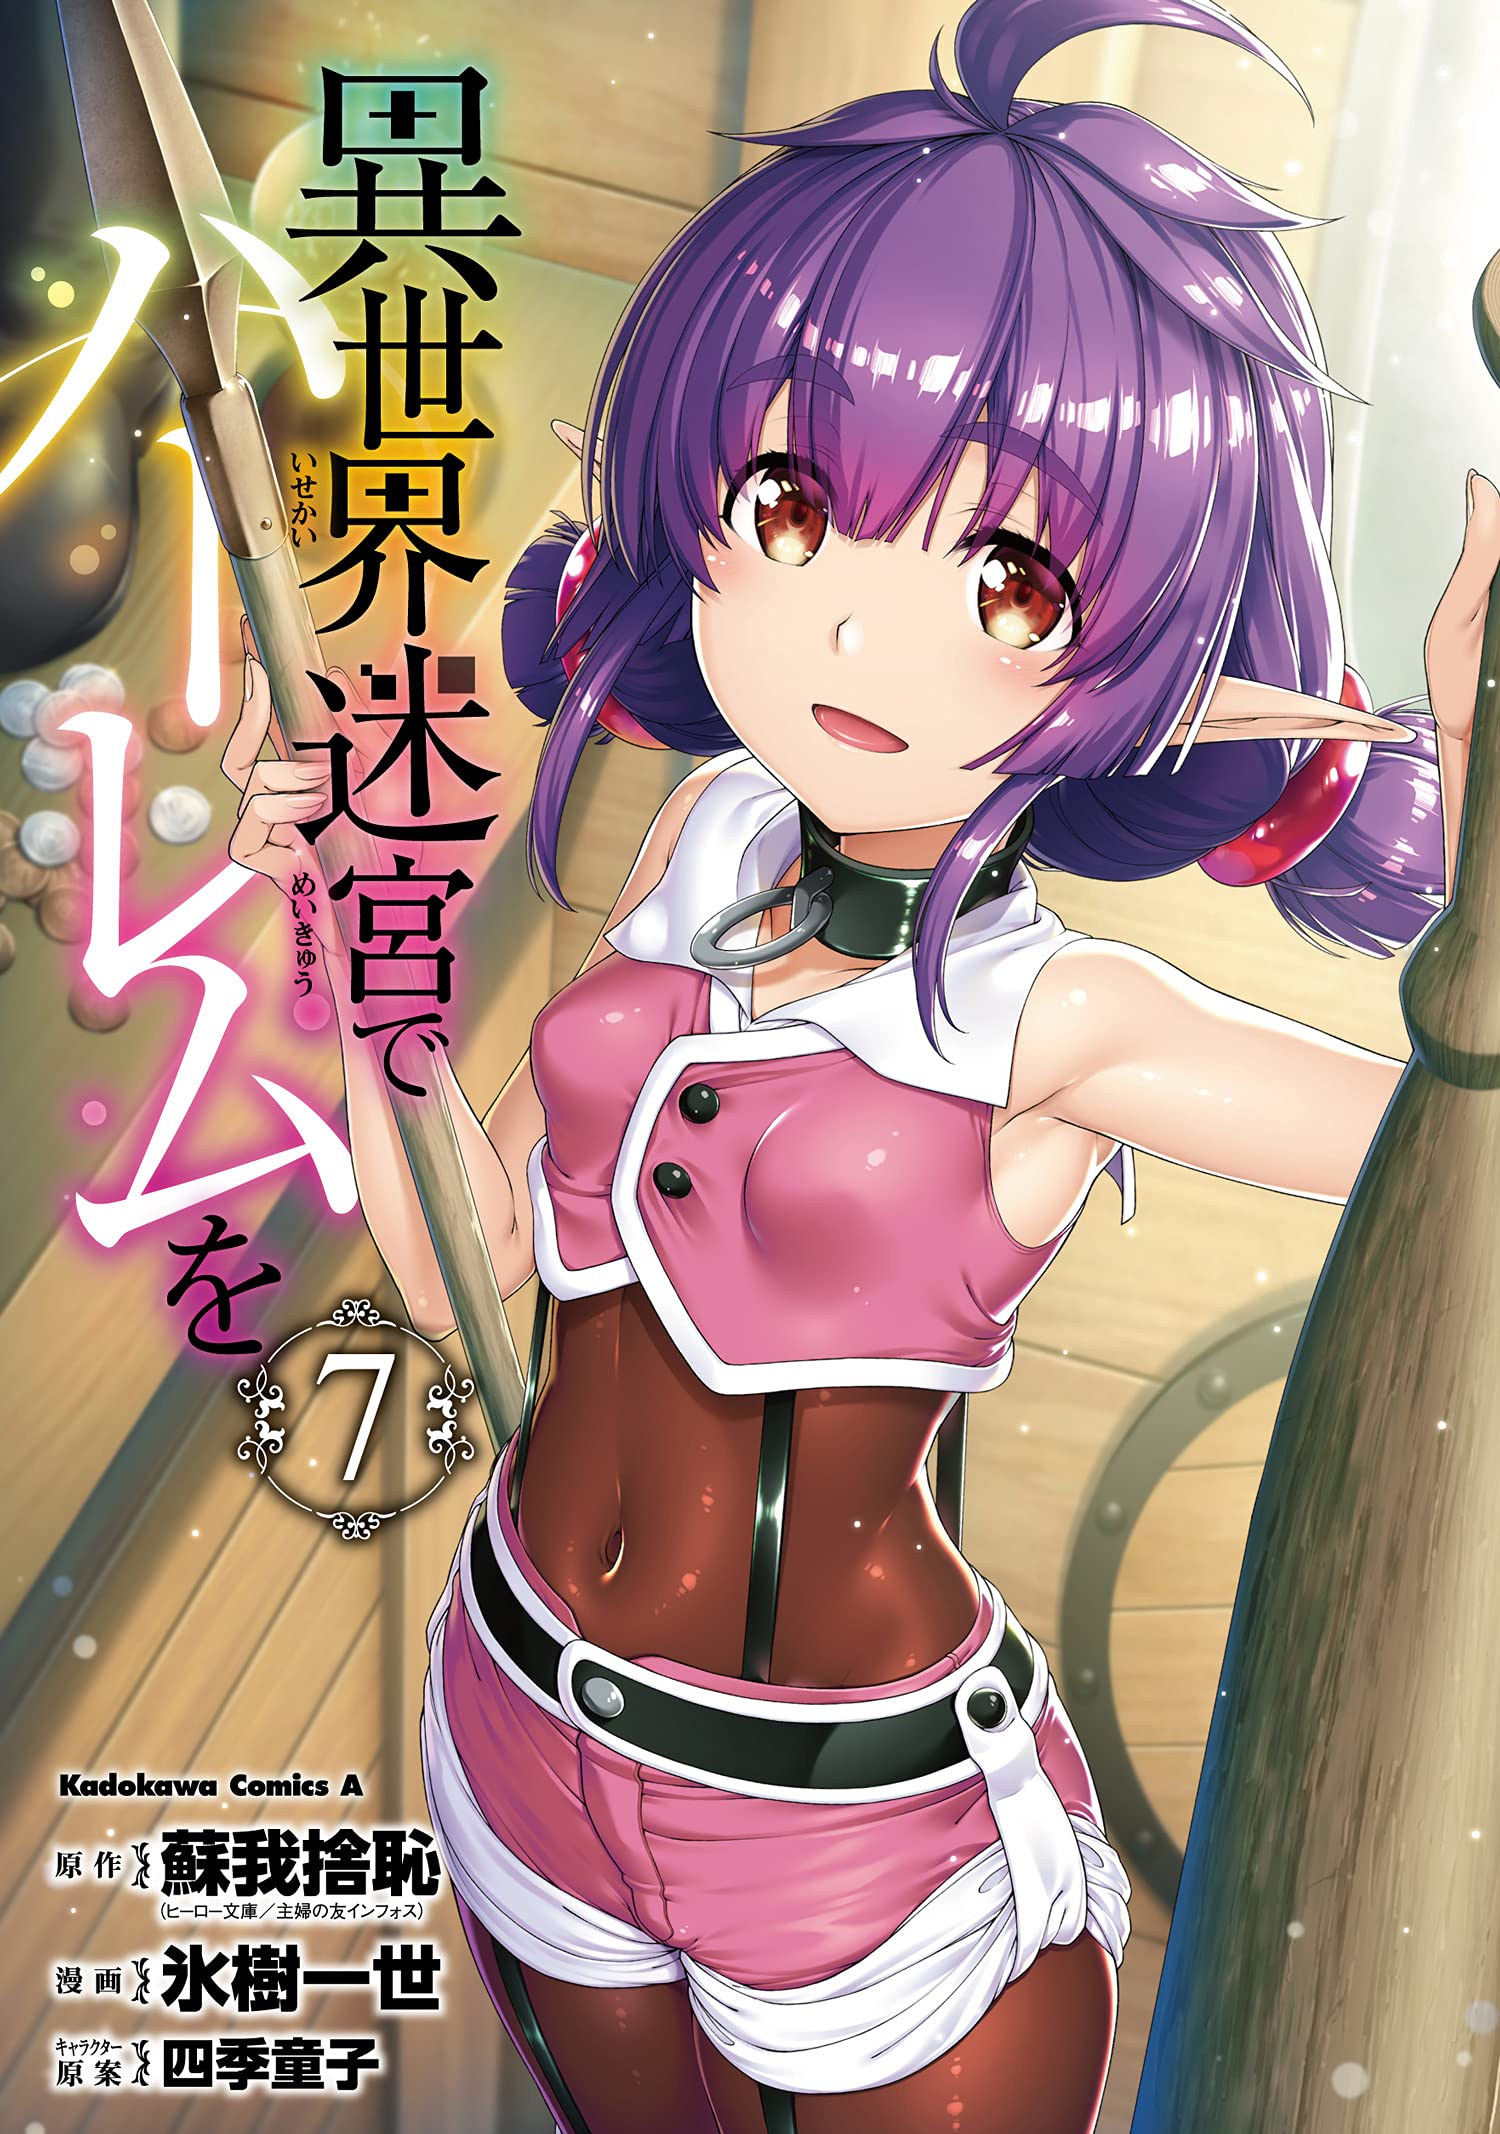 Harem in the Labyrinth of Another World 8 – Japanese Book Store